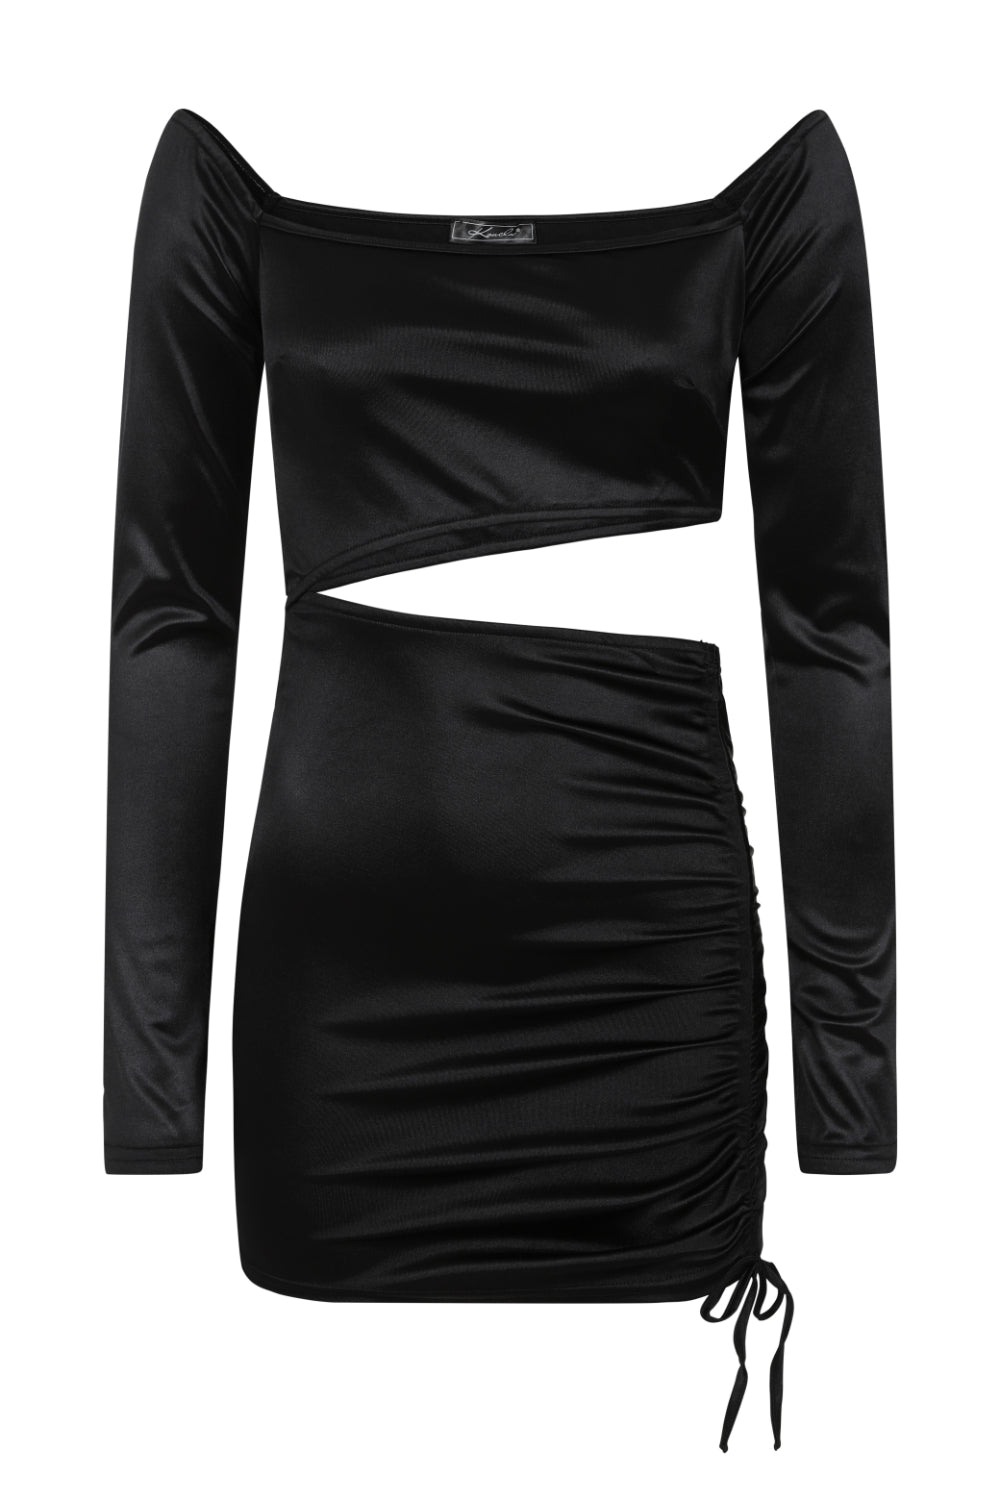 Cut It Out Black Slinky Satin Cut Out Ruched Mini Dress